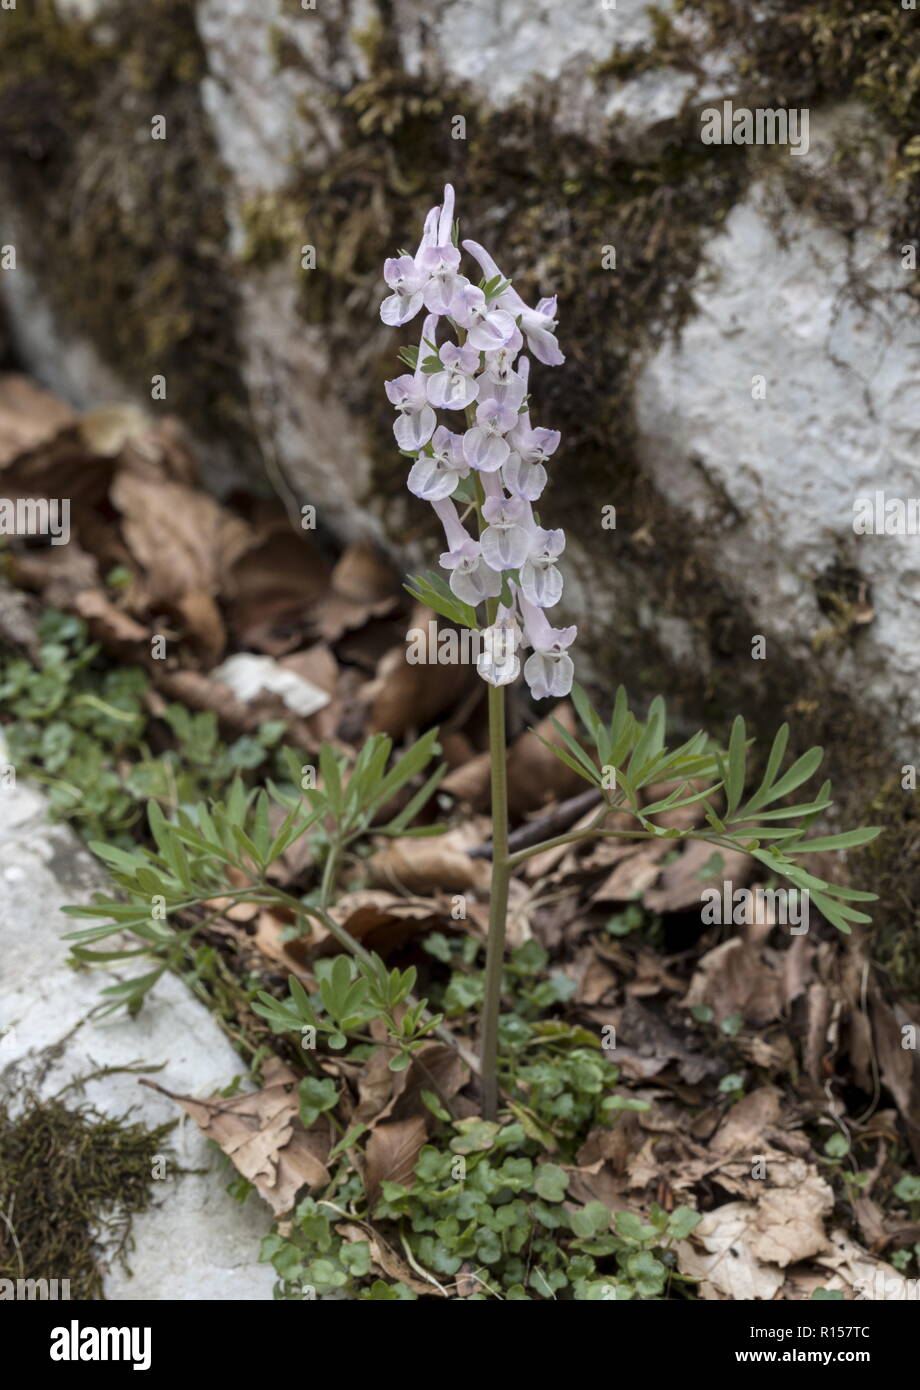 Solid-rooted fumewort or bird in a bush, Corydalis solida, in flower, Velebit mountains, Croatia. Stock Photo